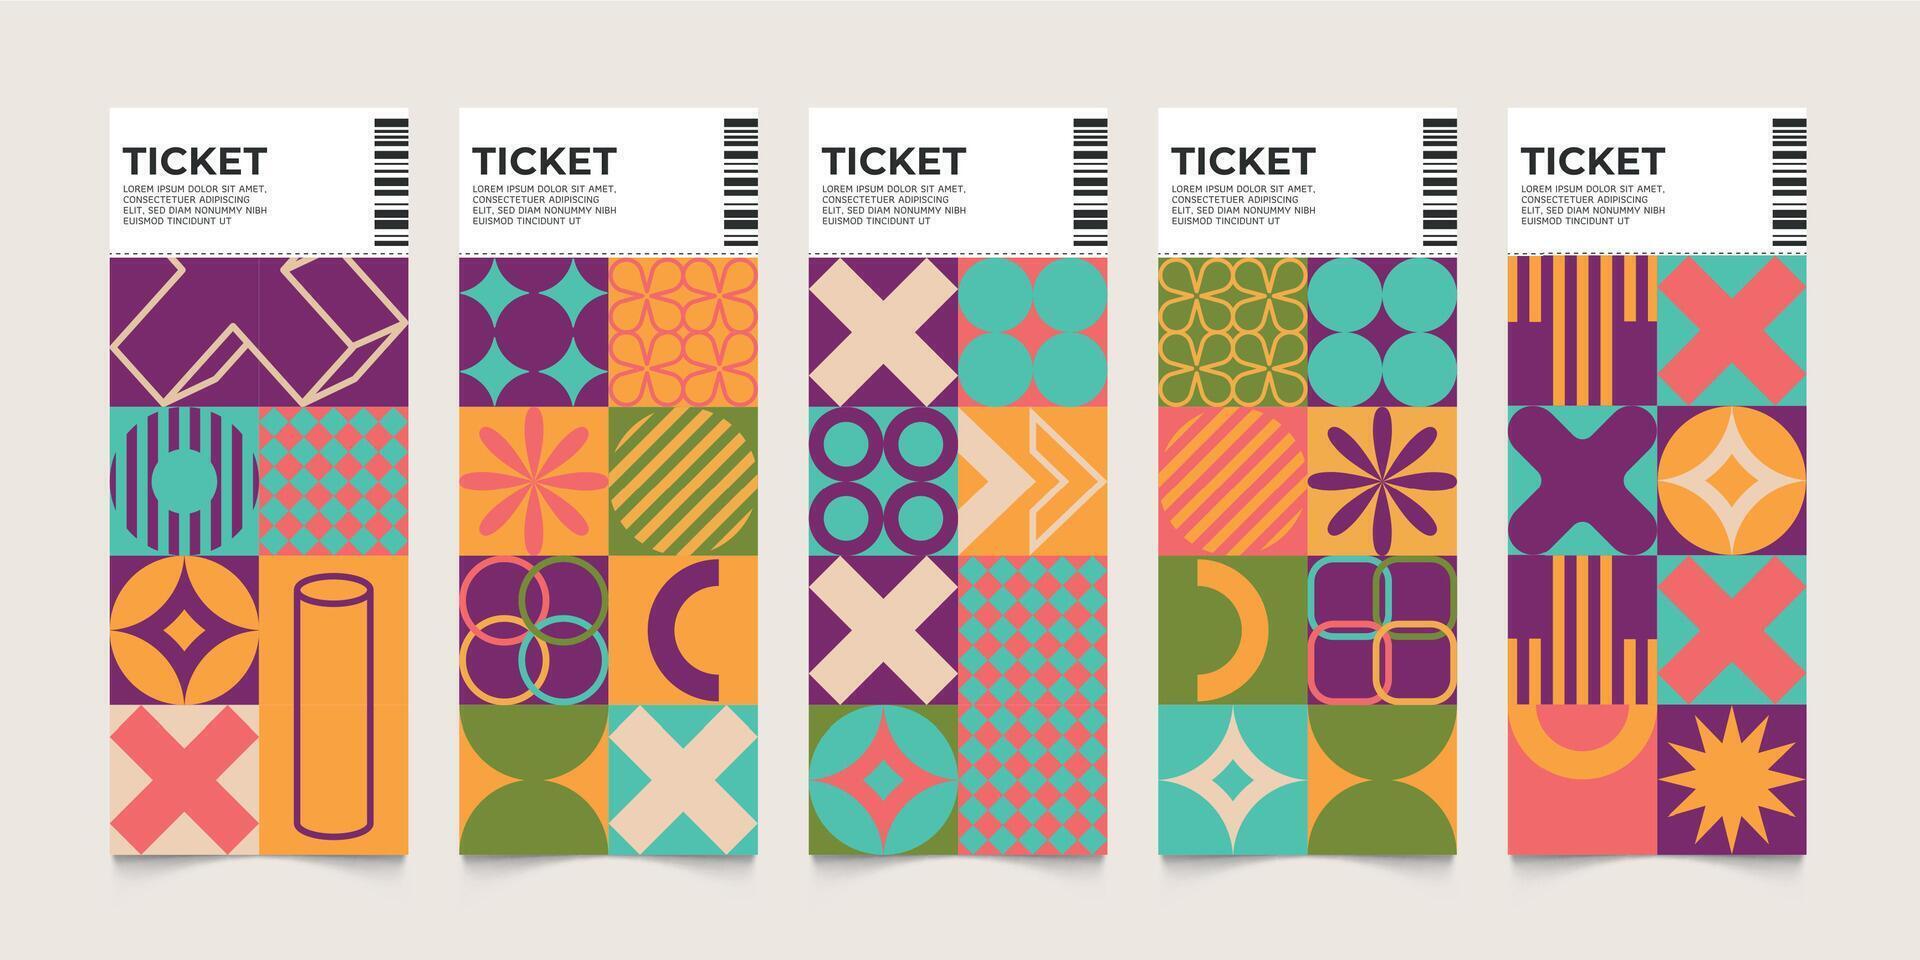 Tickets abstract lauout. Contemporary print of creative invitation flyer with minimalist geometric shapes and bauhaus creative concept. Vector set